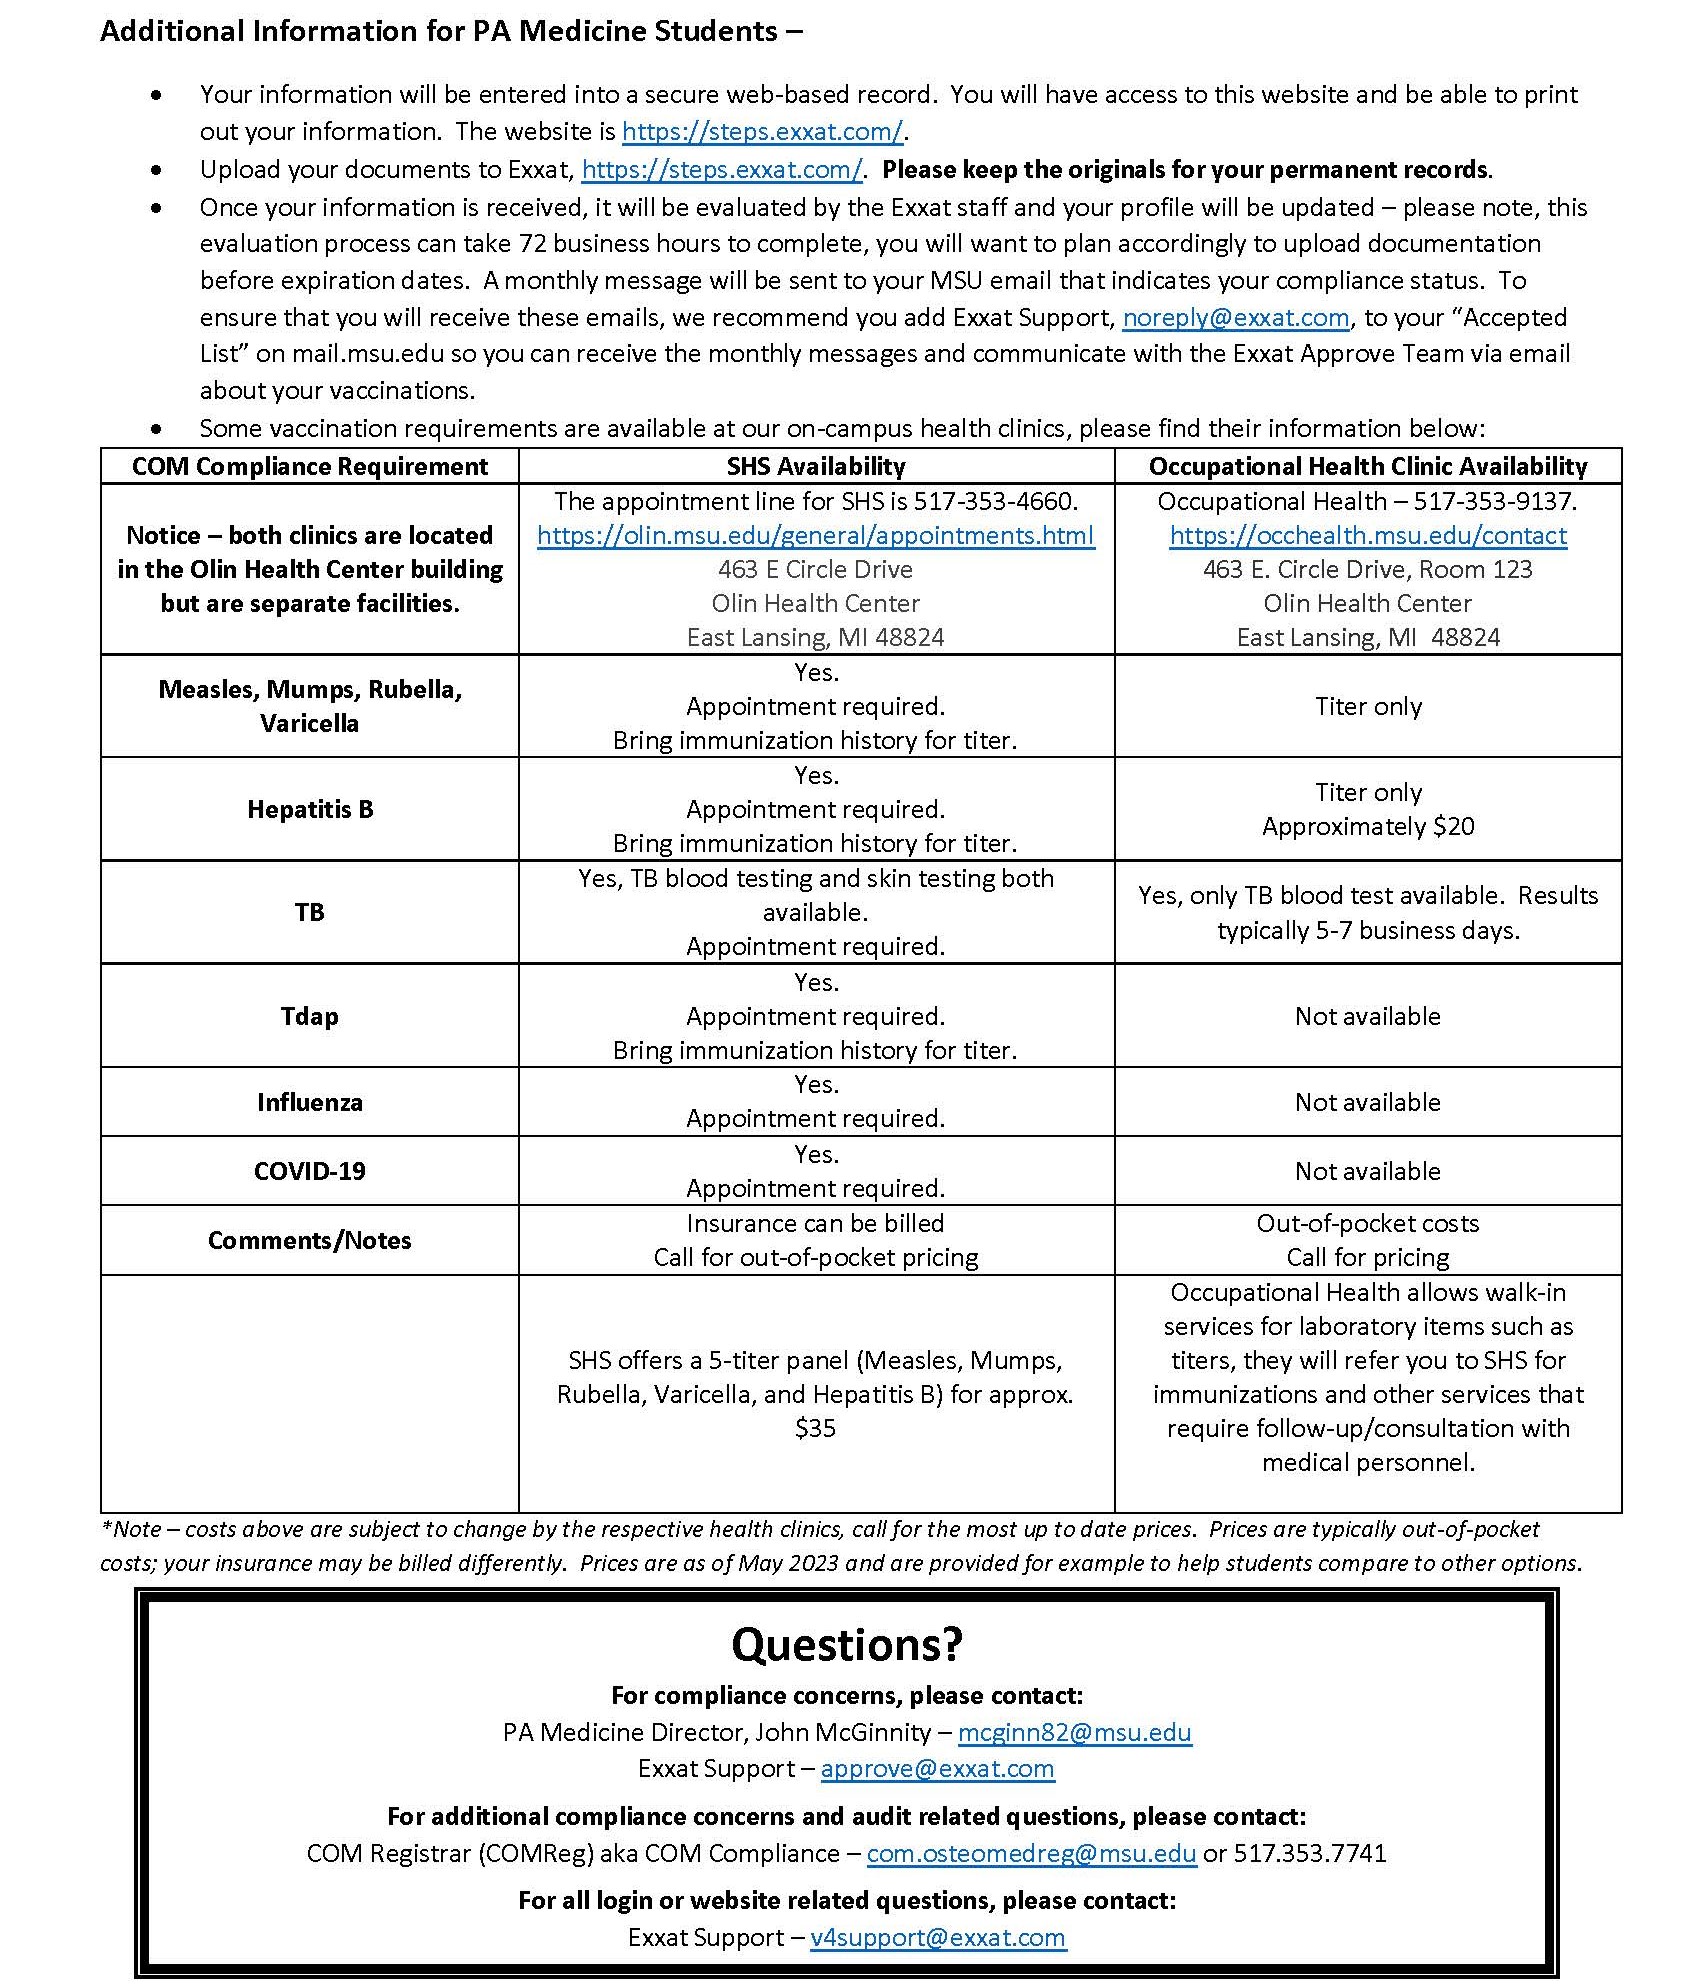 Healthcare Professional Student Information Form & Chart [PA Medicine]_Page_9.jpg